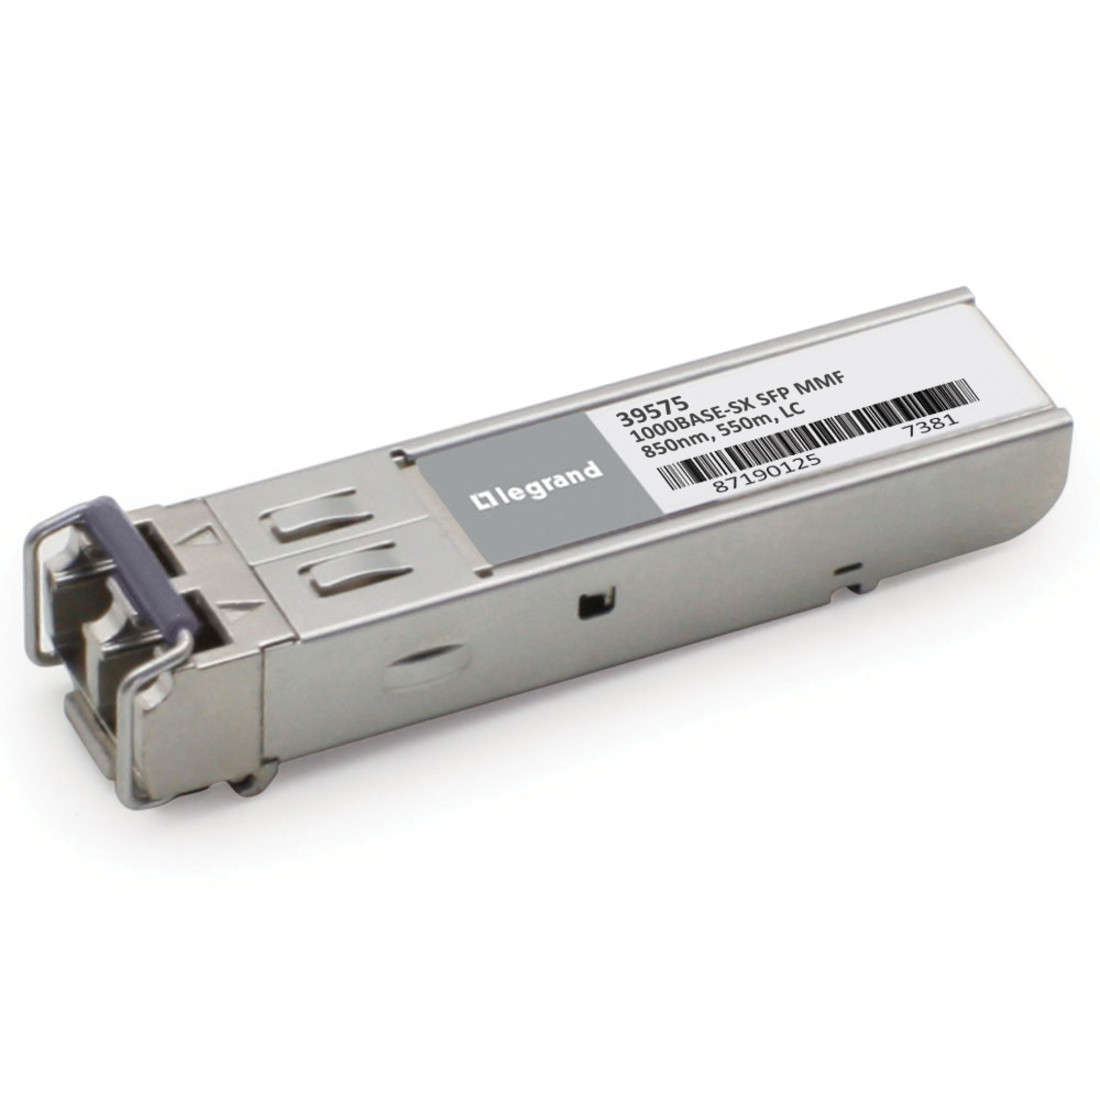 C2G NETGEAR AGM731F compatible 1000Base-SX SFP Transceiver (MMF, 850nm,  550m, LC)For Data Networking, Optical Network1 x 1000Base-SX, SFP, D...  39575 - Corporate Armor